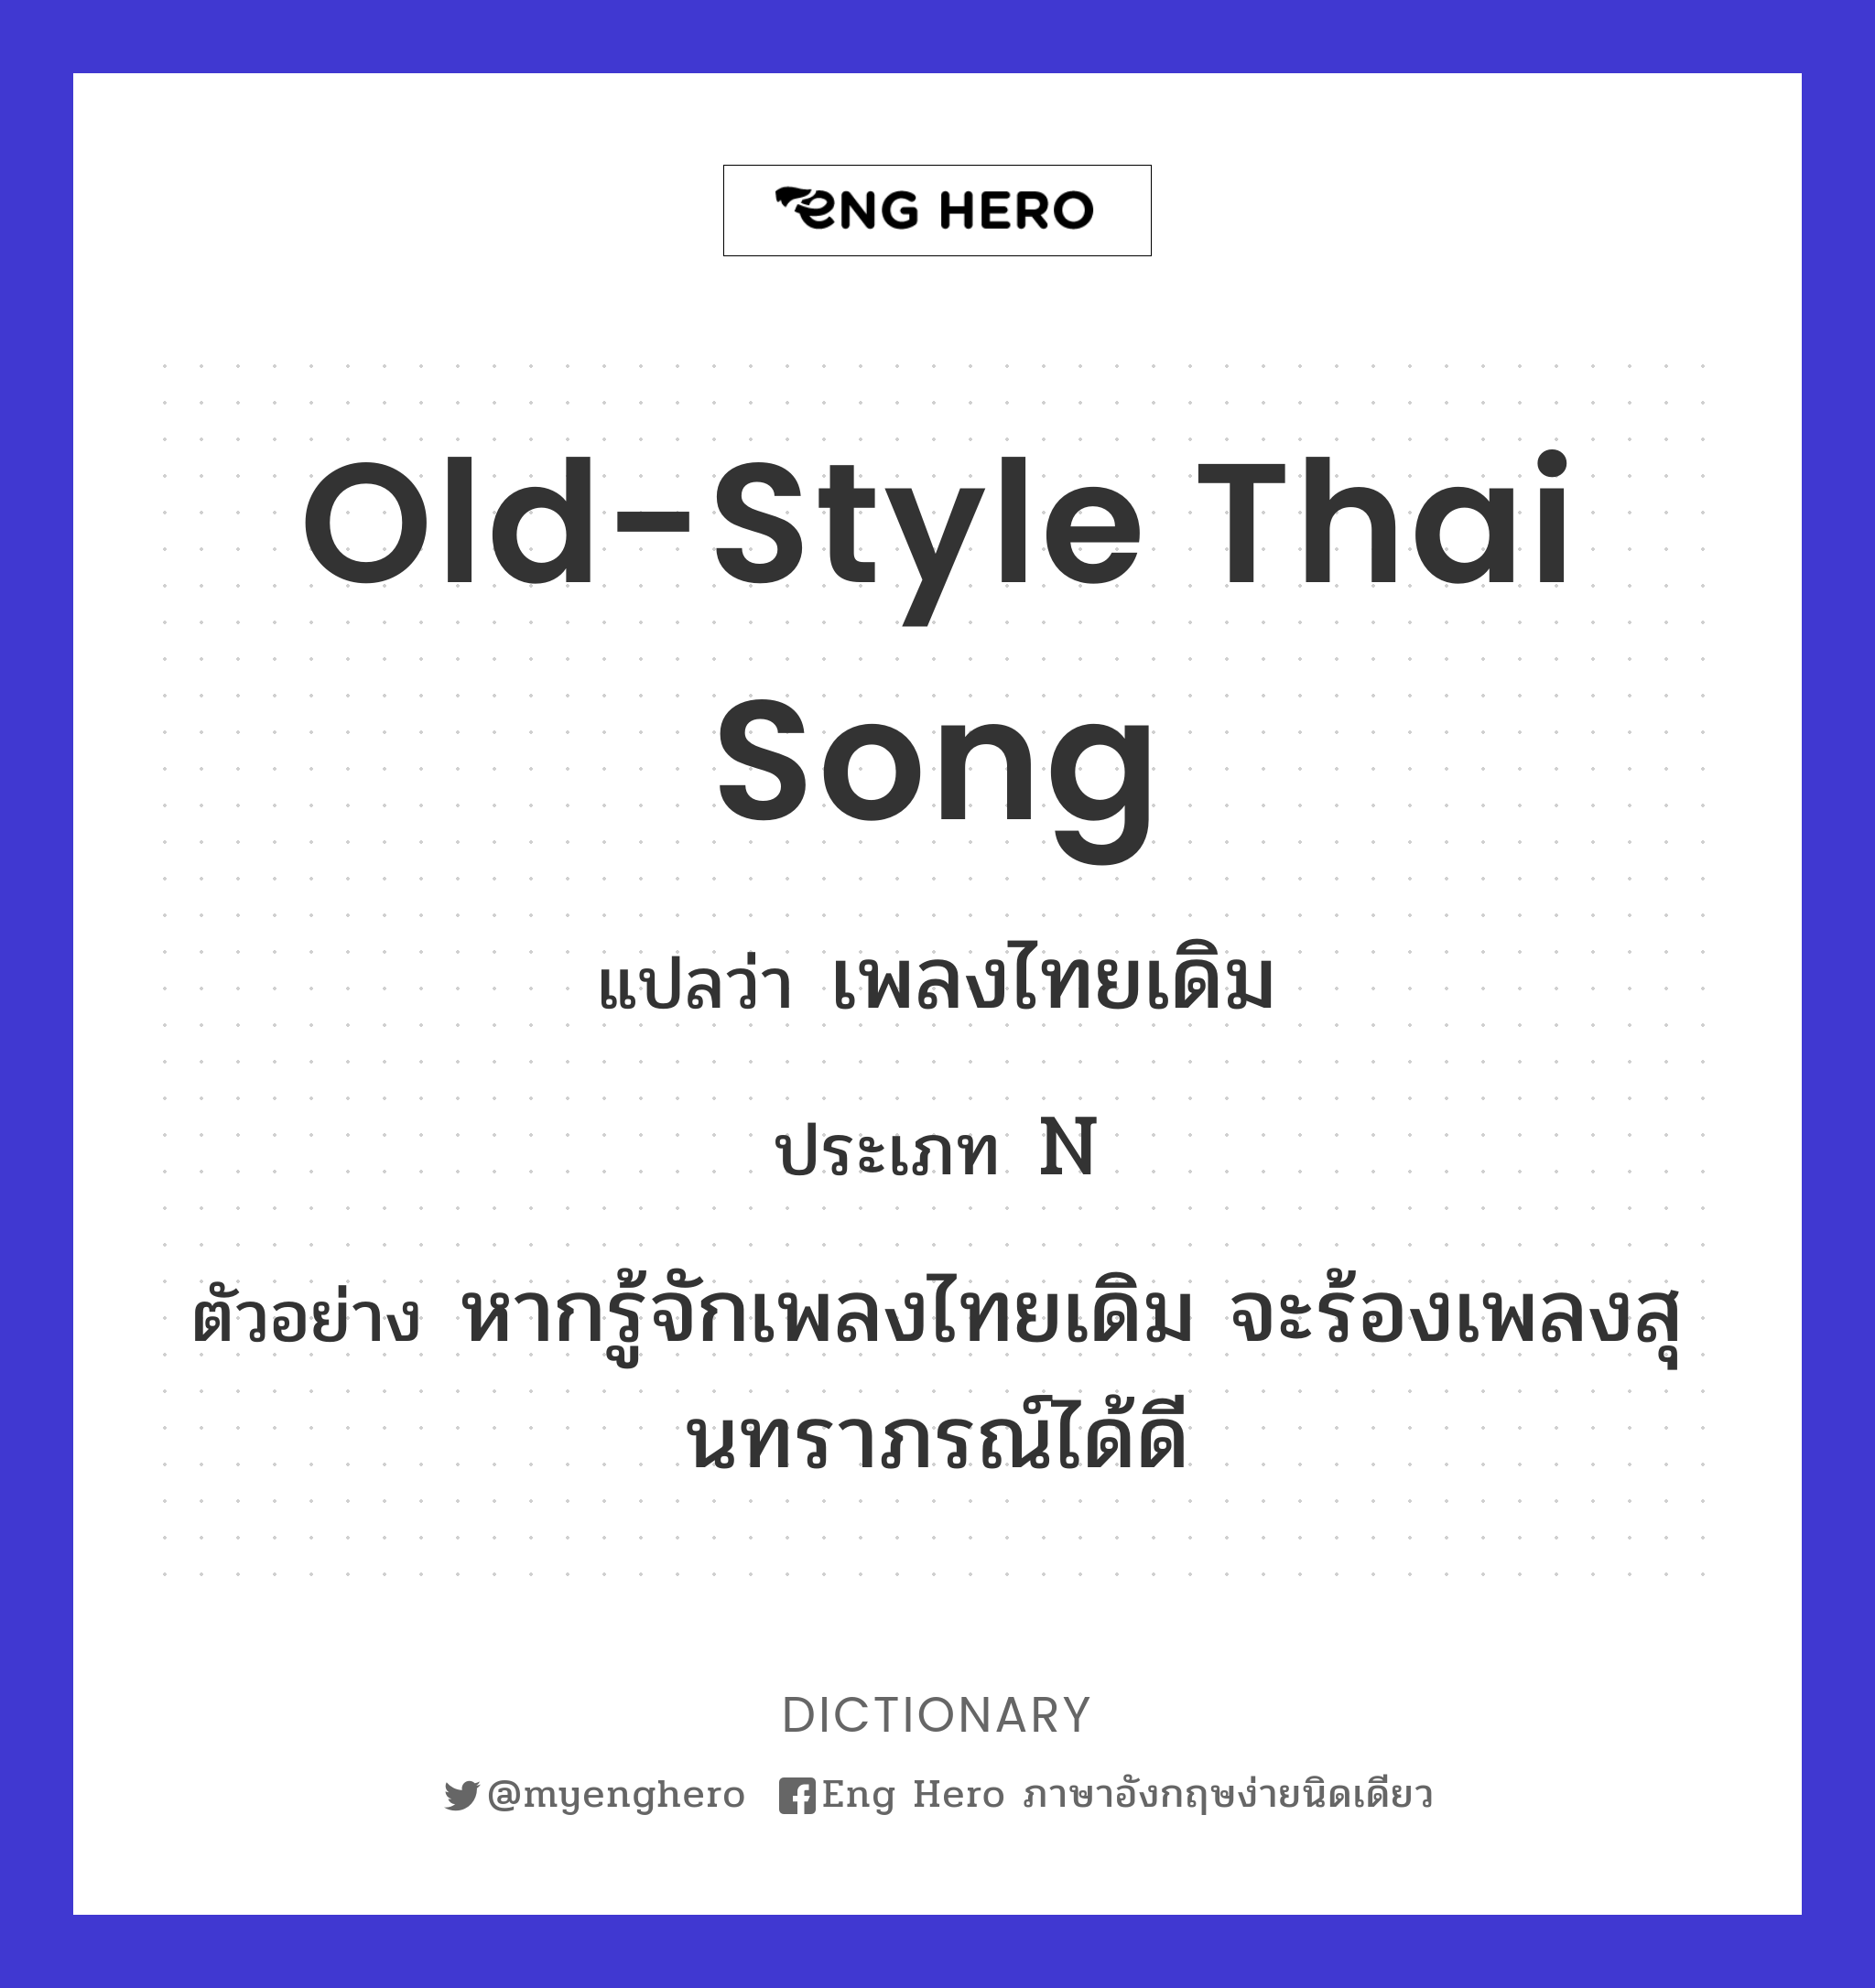 old-style Thai song